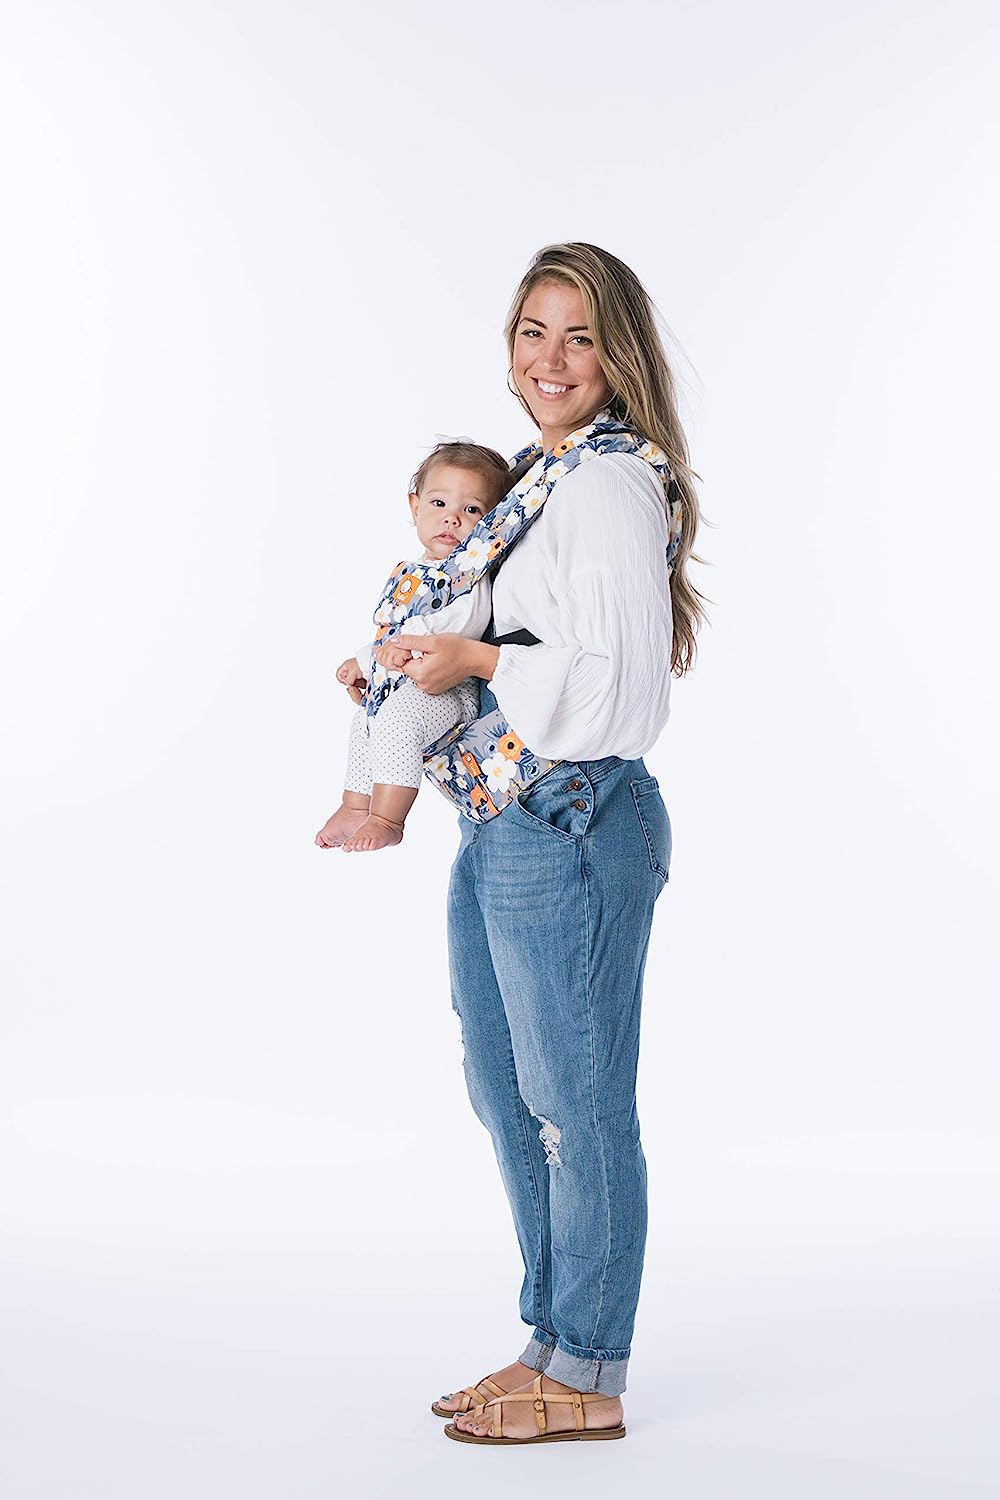 Tula Explore TBCA6F60 French Marigold Ergonomic Adjustable Baby Carrier with Front Position for Walking with Your Baby from 3 2 to 20 4 kg without Baby Pillow